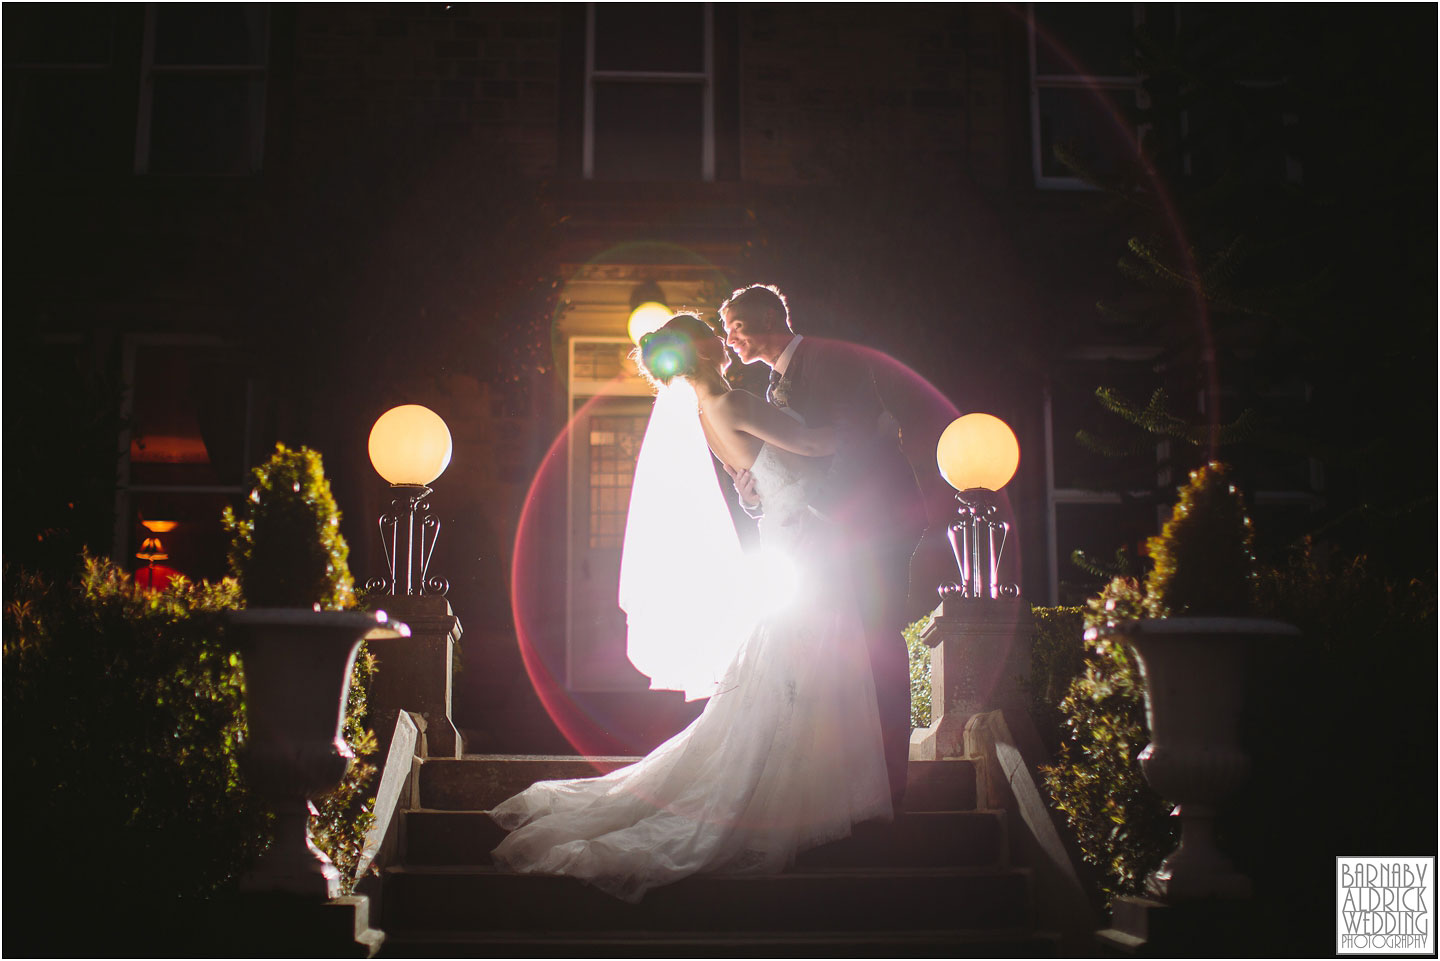 A bride and groom kiss in the evening at Crow Hill wedding venue in Marsden in Yorkshire